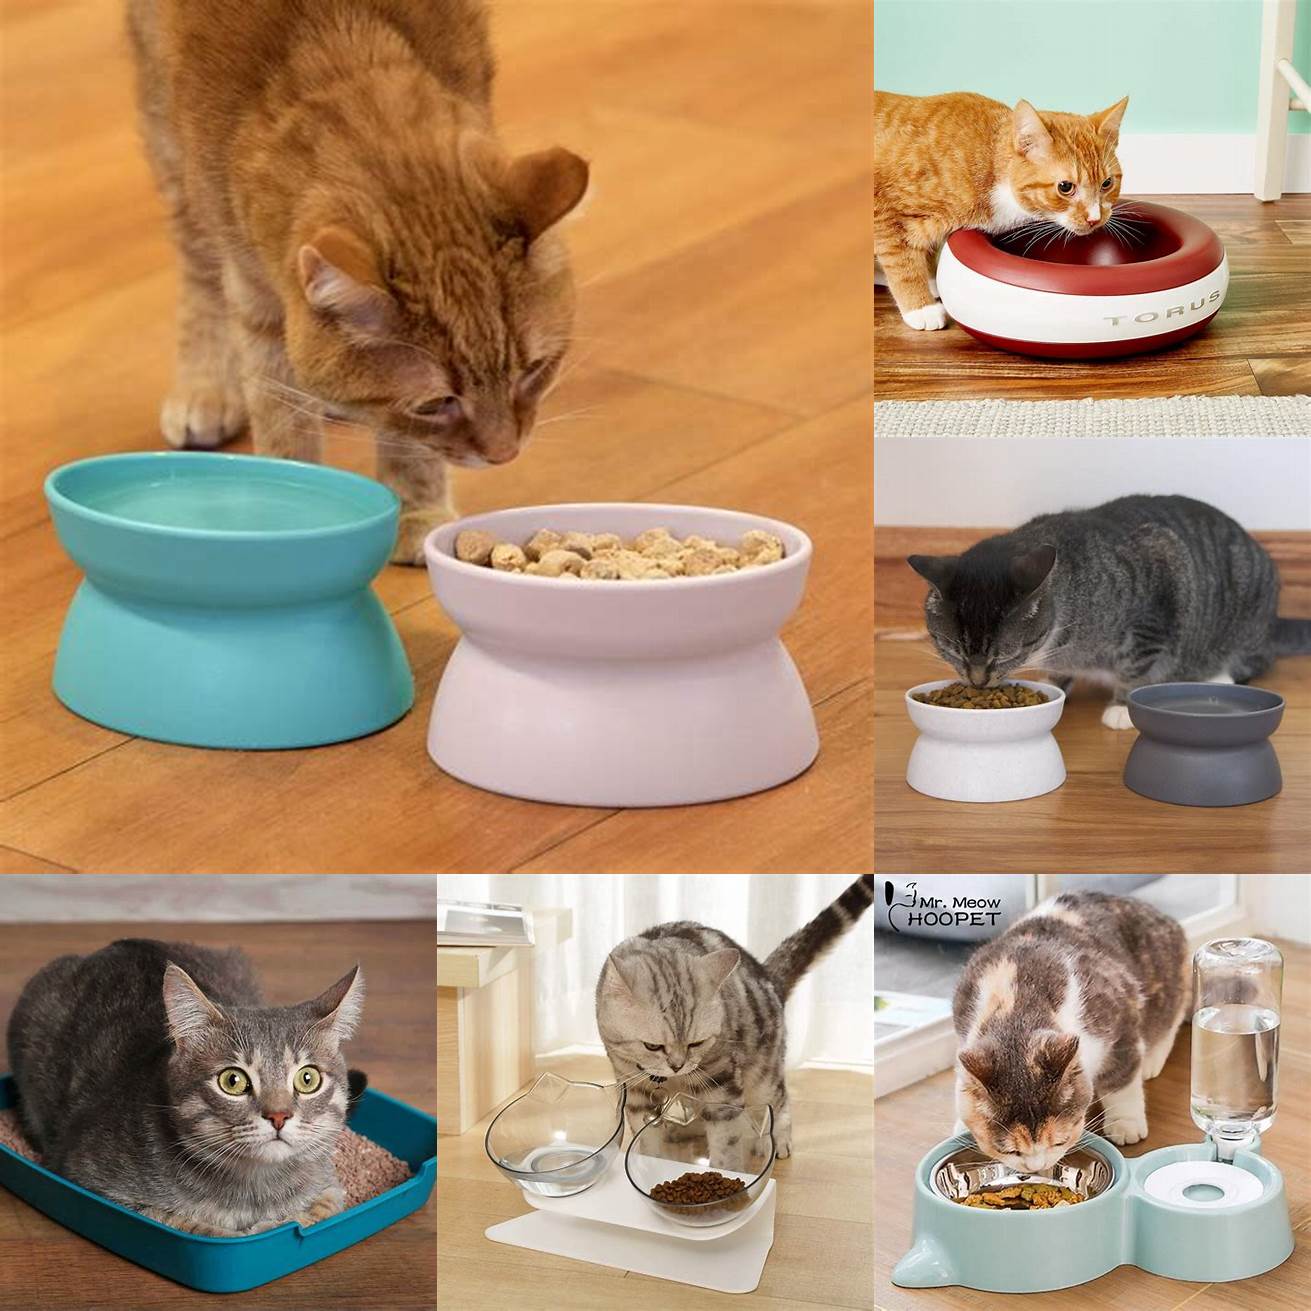 Provide separate resources for each cat such as food and water bowls litter boxes and sleeping areas This can help reduce competition and territorial disputes